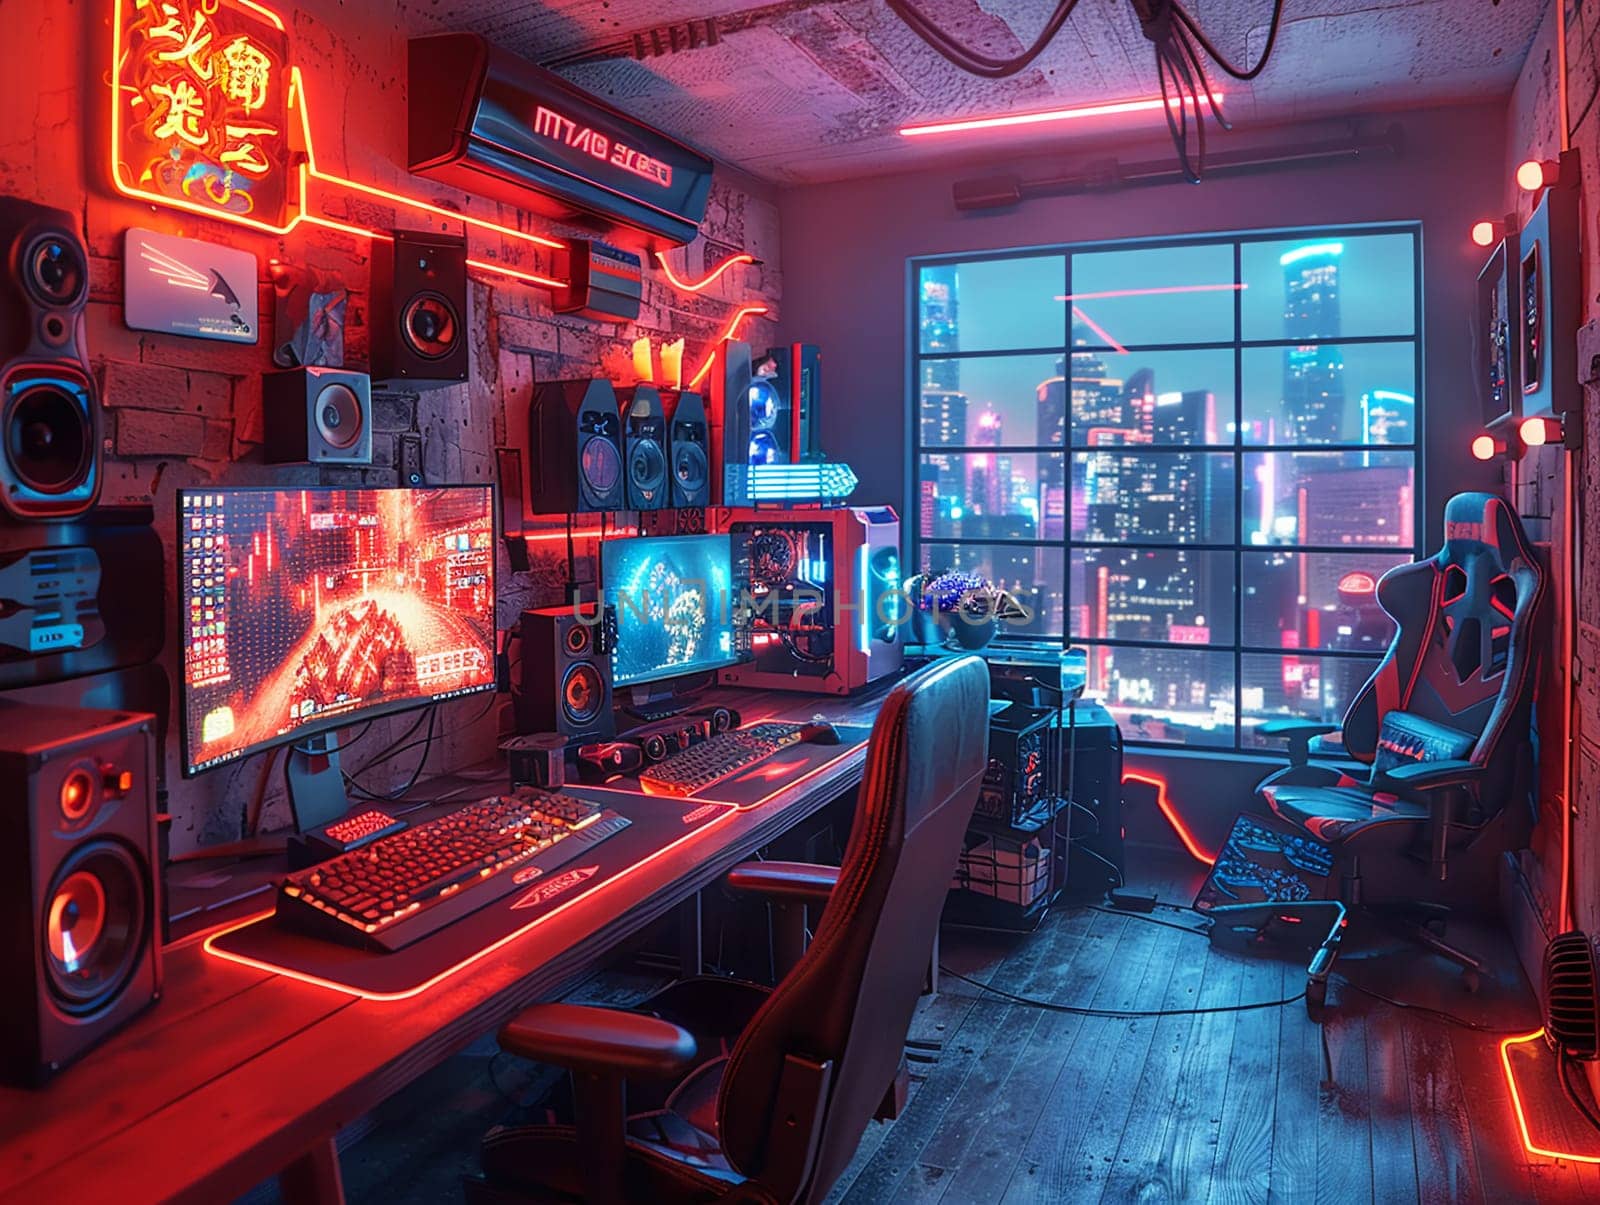 Cyberpunk gaming den with neon lights and high-tech setups by Benzoix